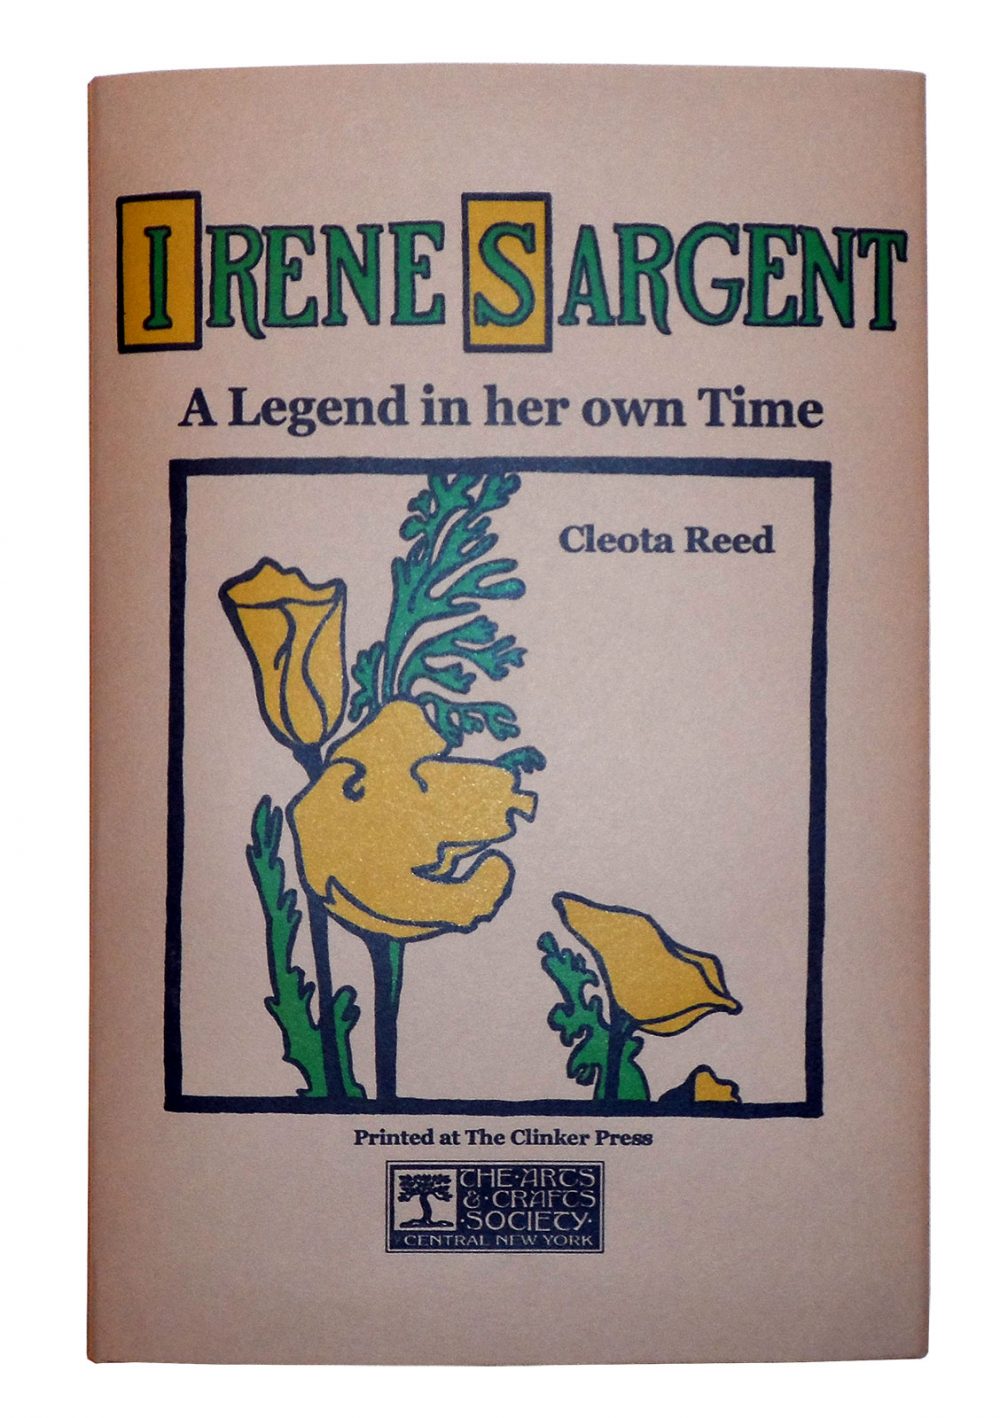 "Irene Sargent" by Cleota Reed